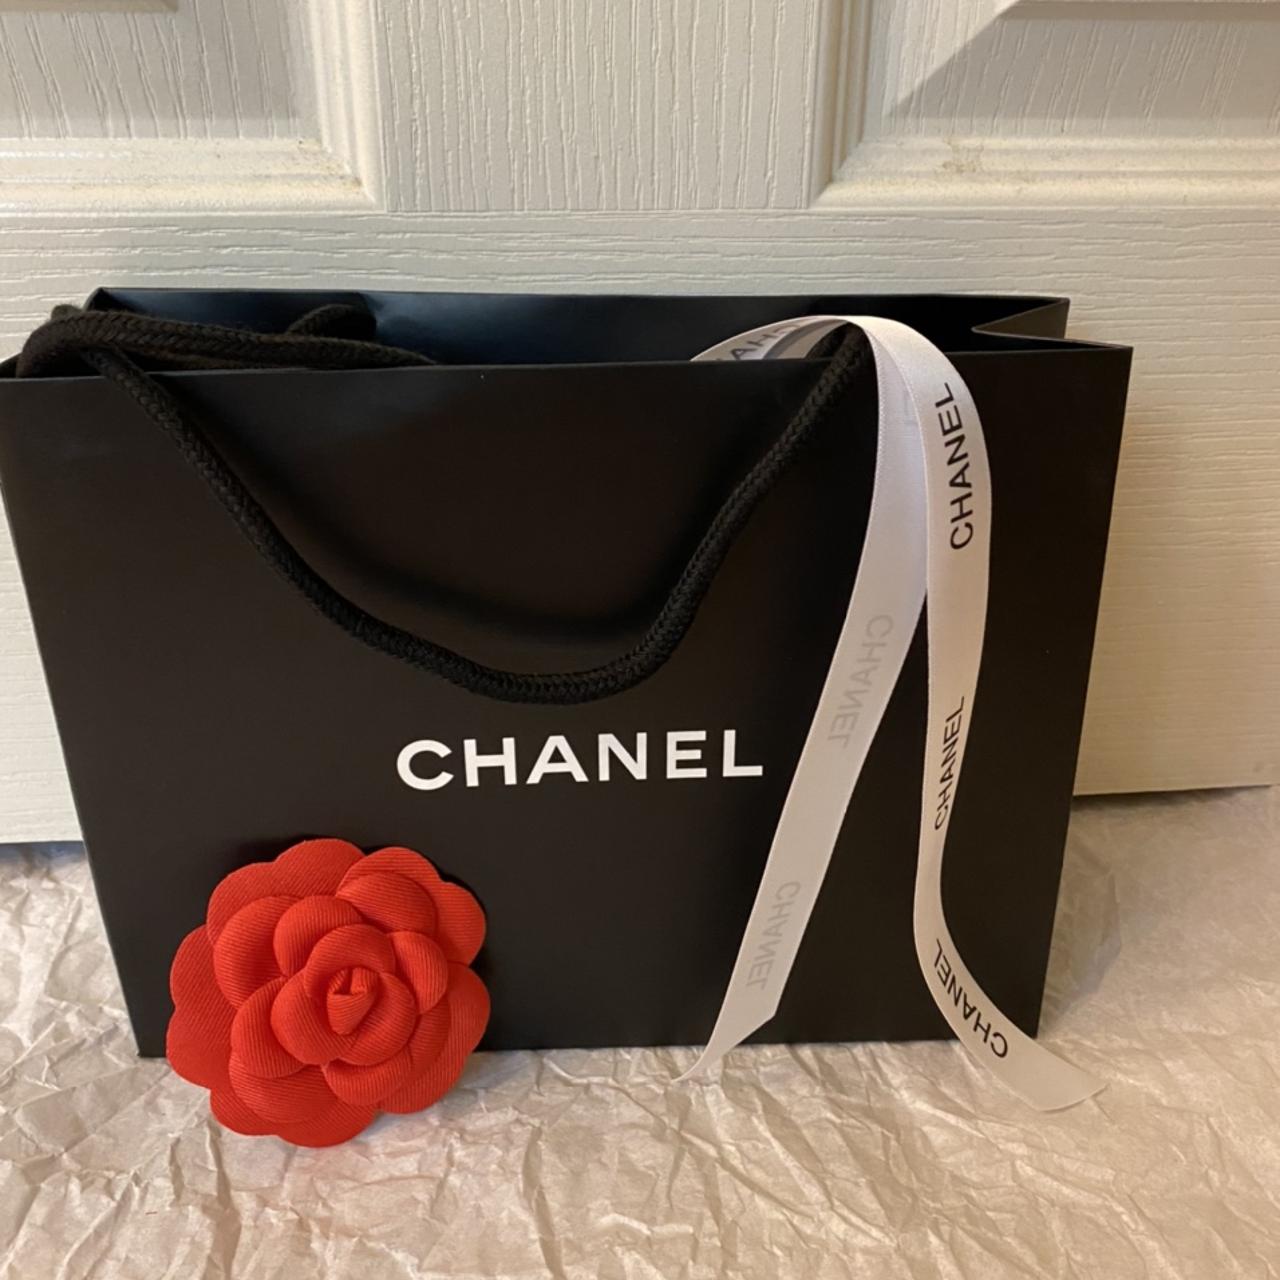 Bnew Gift / novelty item by chanel 12.8 x 14 inches - Depop